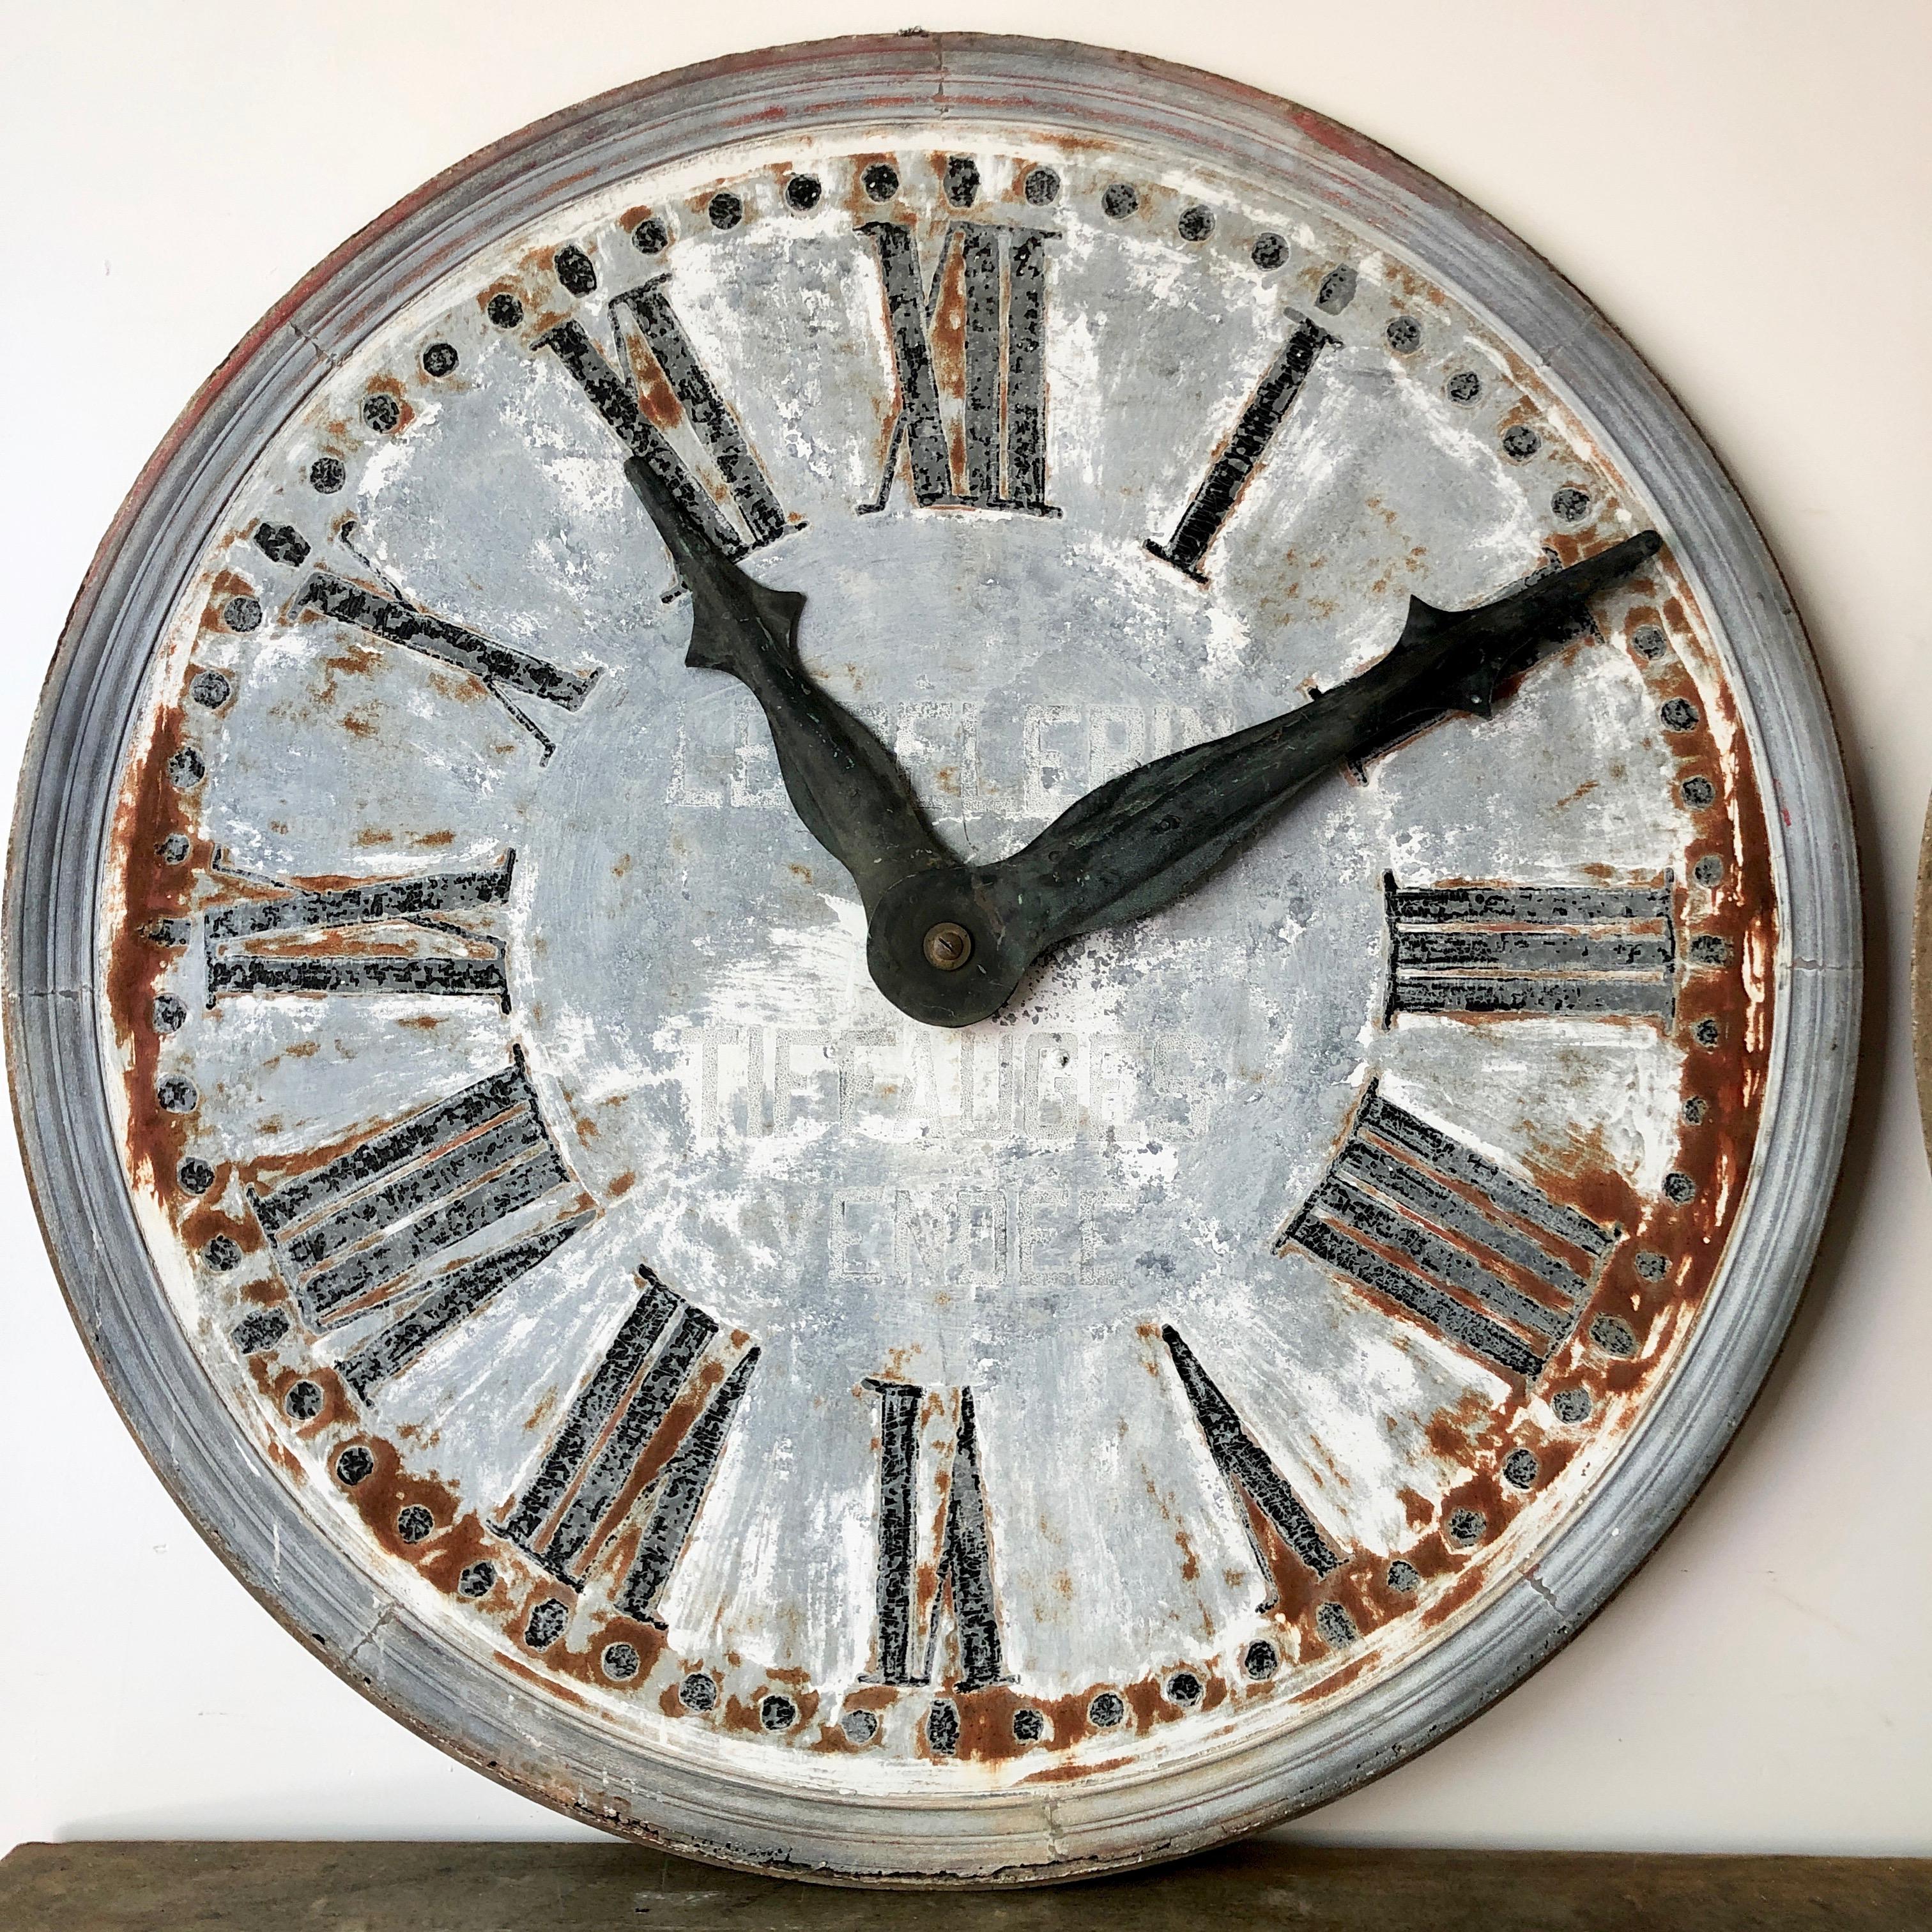 A large 19th century French Zinc town hall clock face in zinc with very well patinated.
Non working, architectural fragment for great decor.
Available two clock faces, priced separately.
Surprising pieces and objects, authentic, decorative and